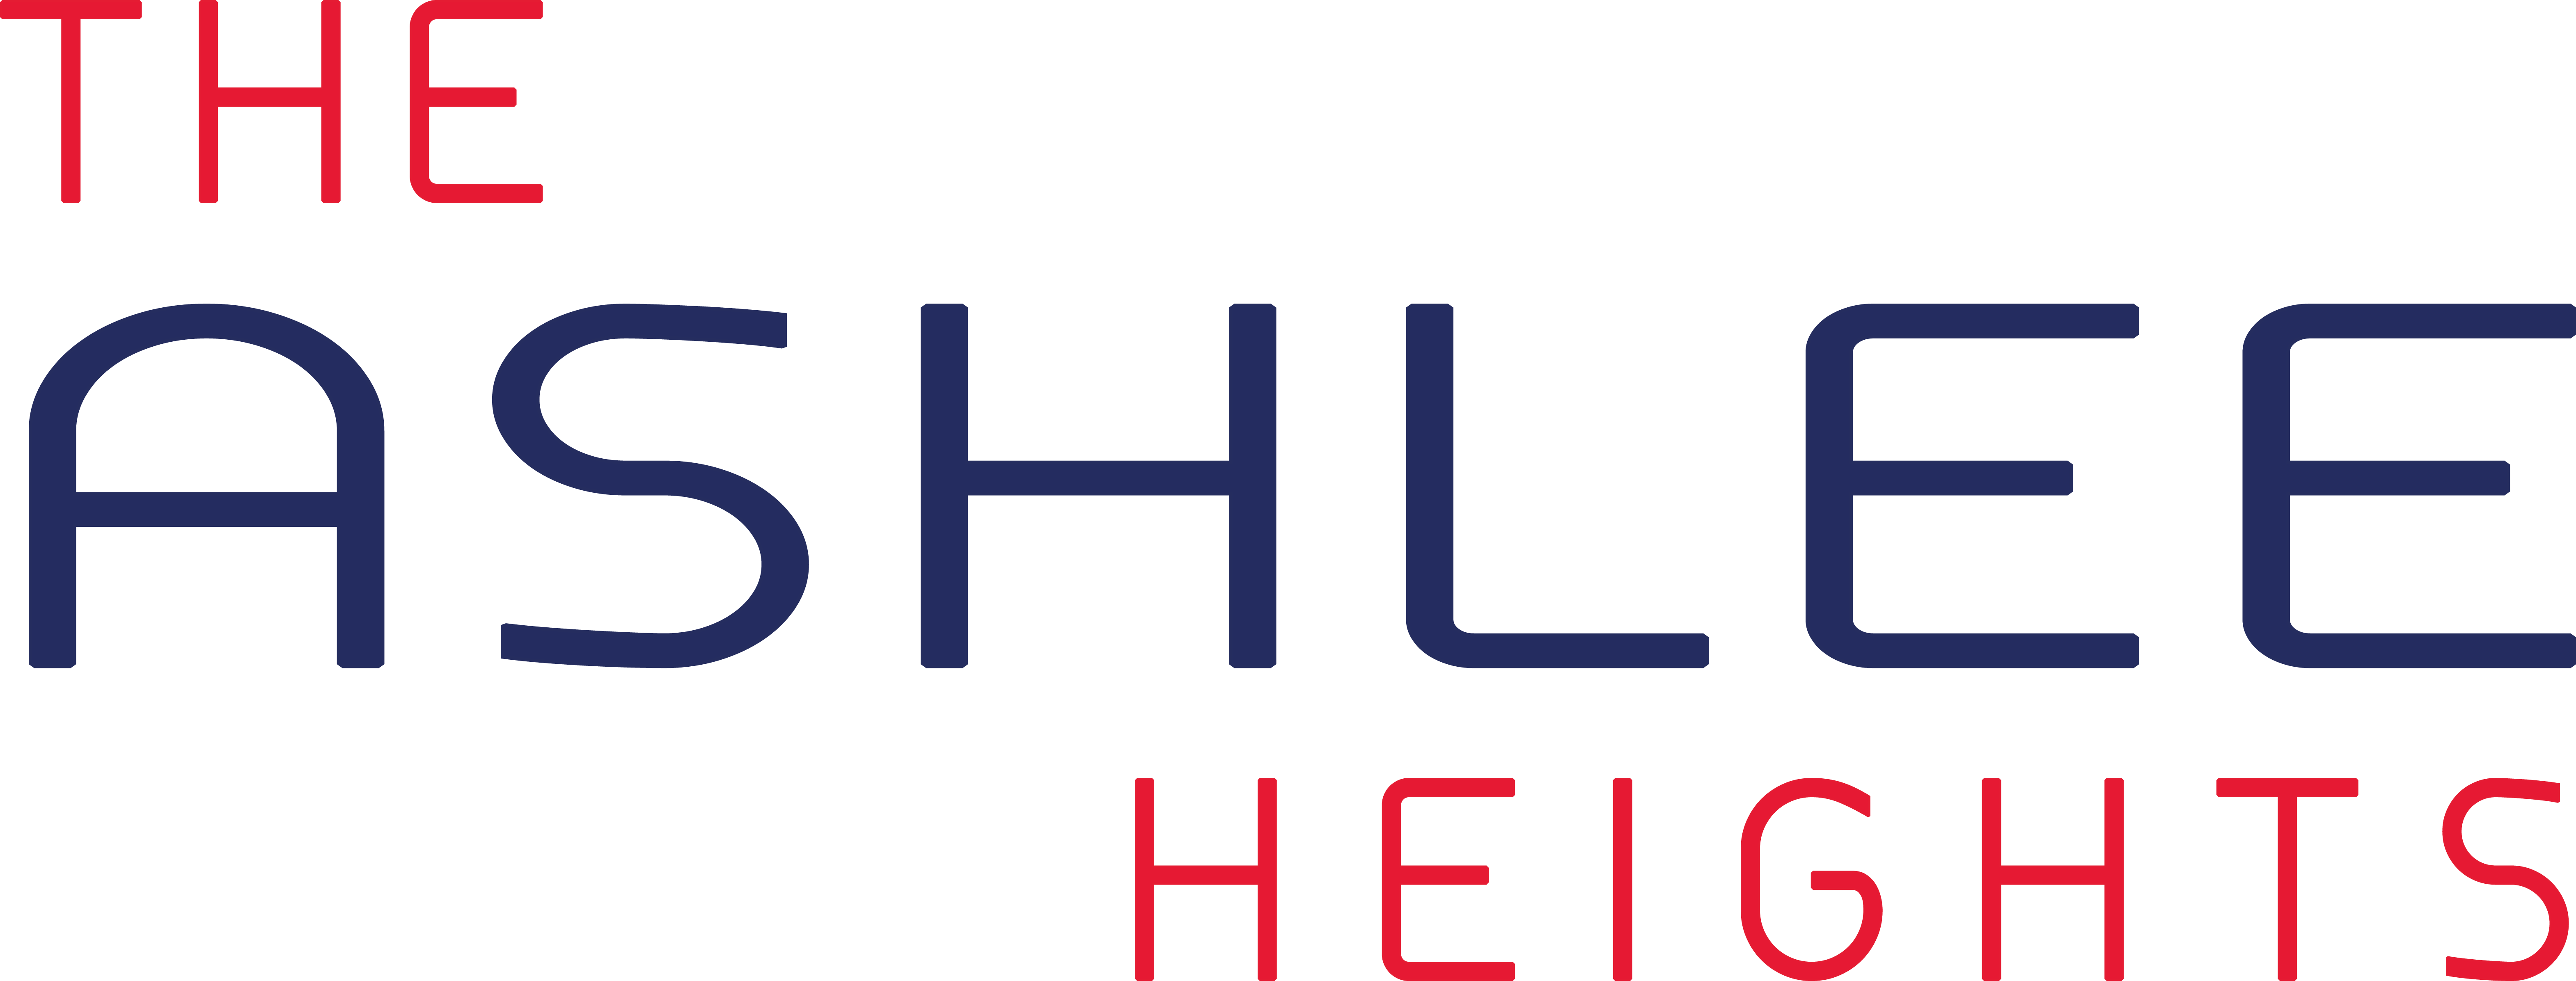 Ashlee Logo - The ASHLEE Heights Patong Hotel & Suites | Official Website